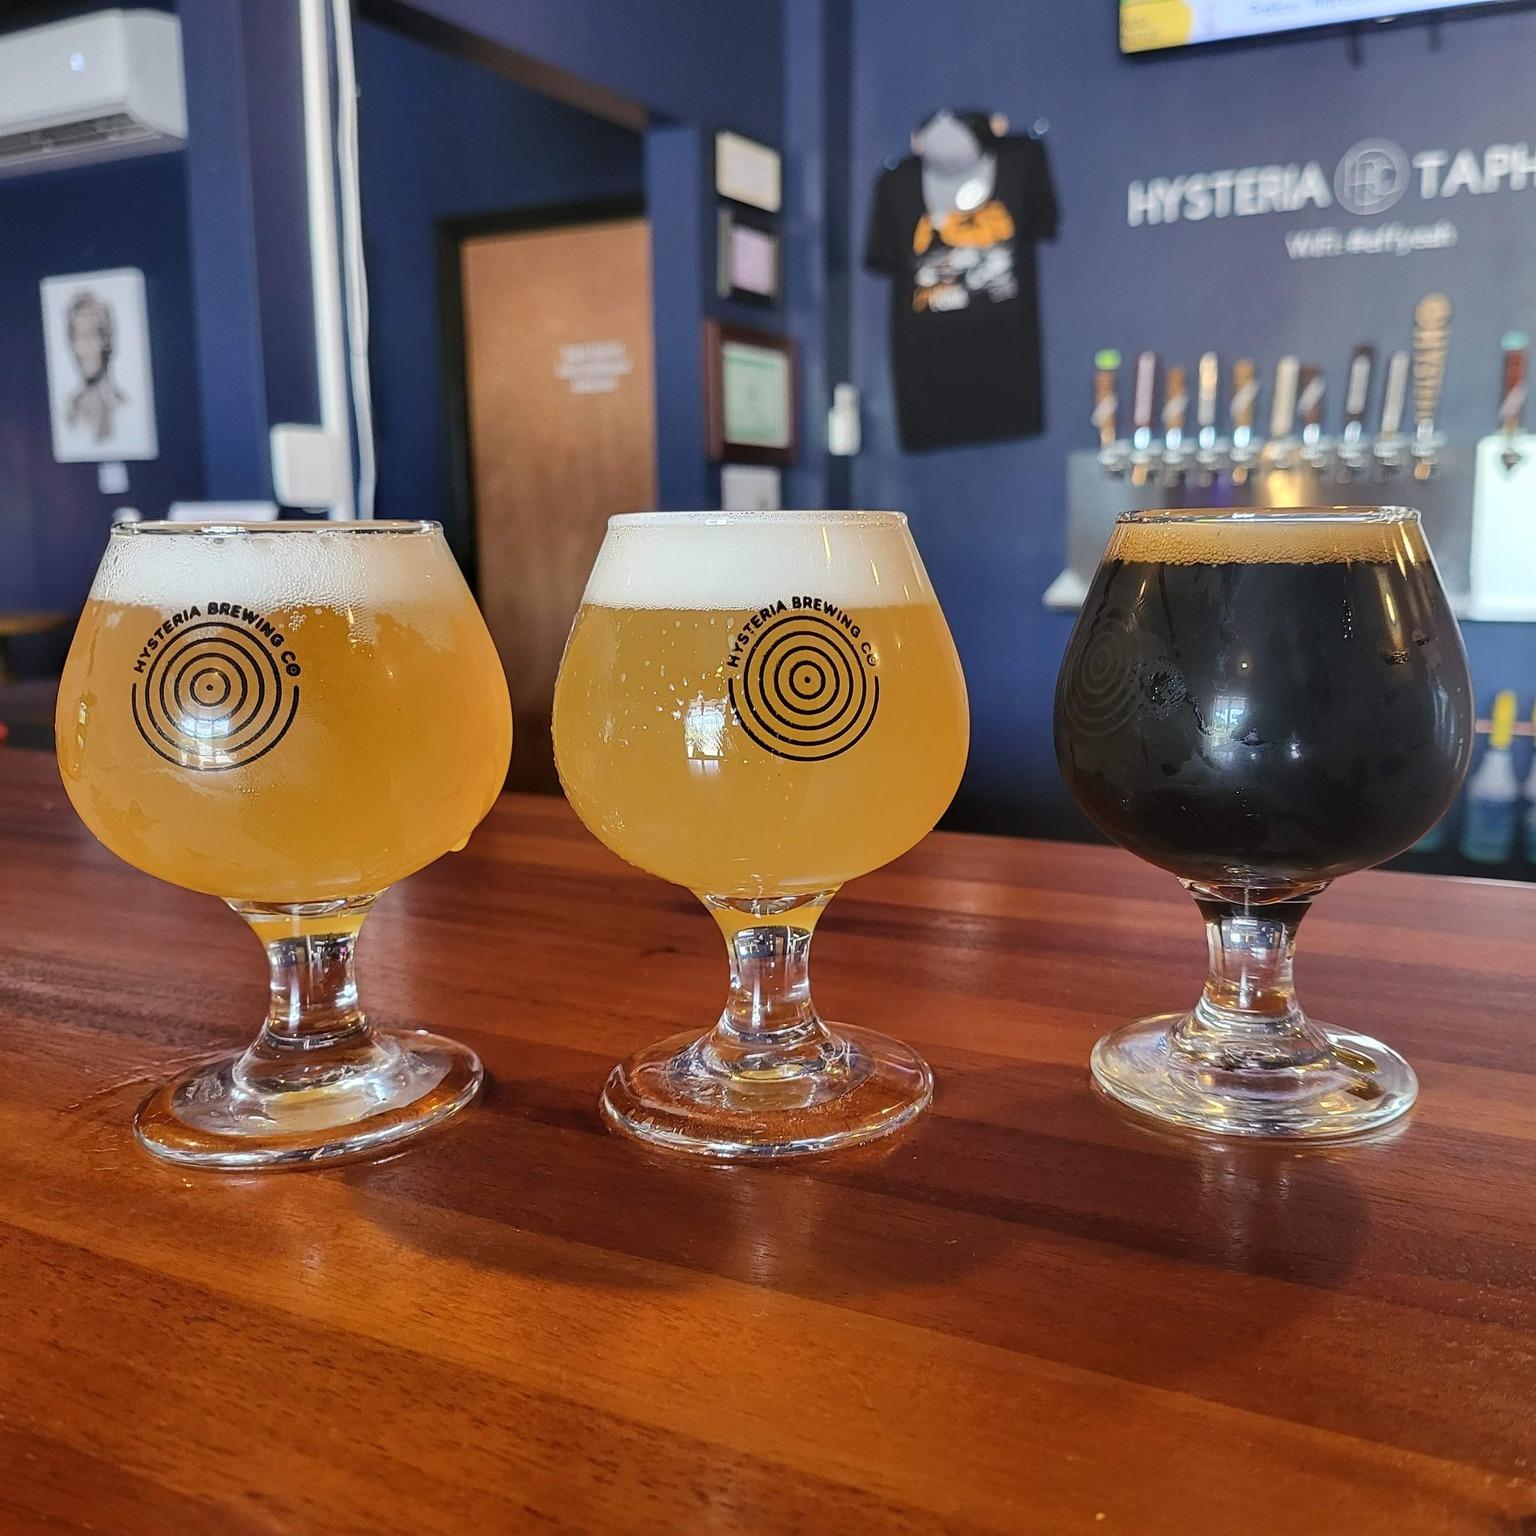 Pet Friendly Hysteria Taphouse